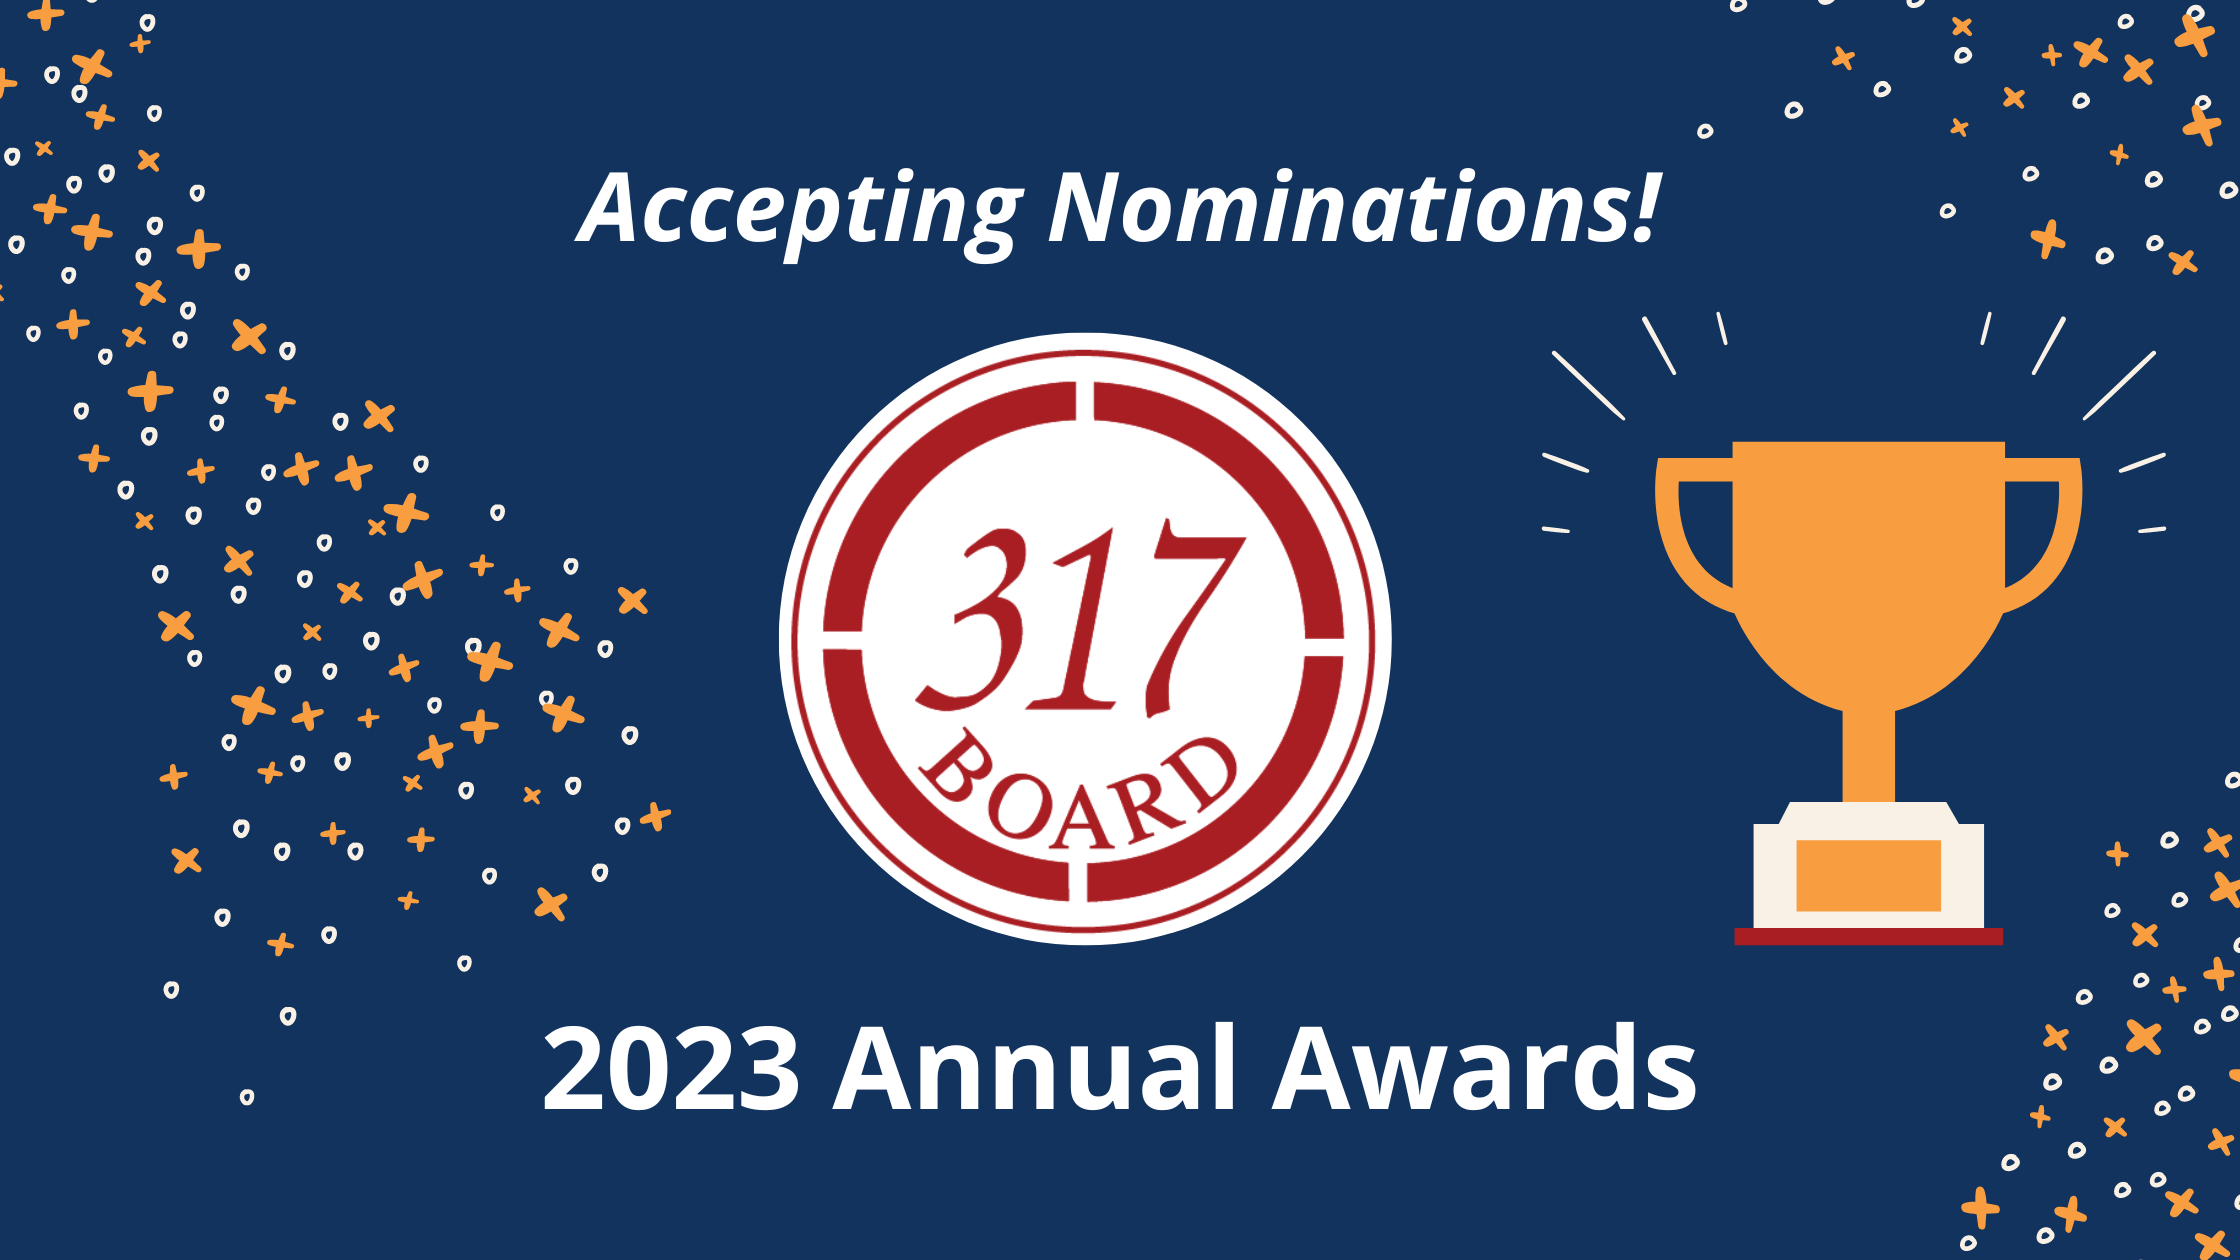 Nominations Open for 2023 Annual Awards